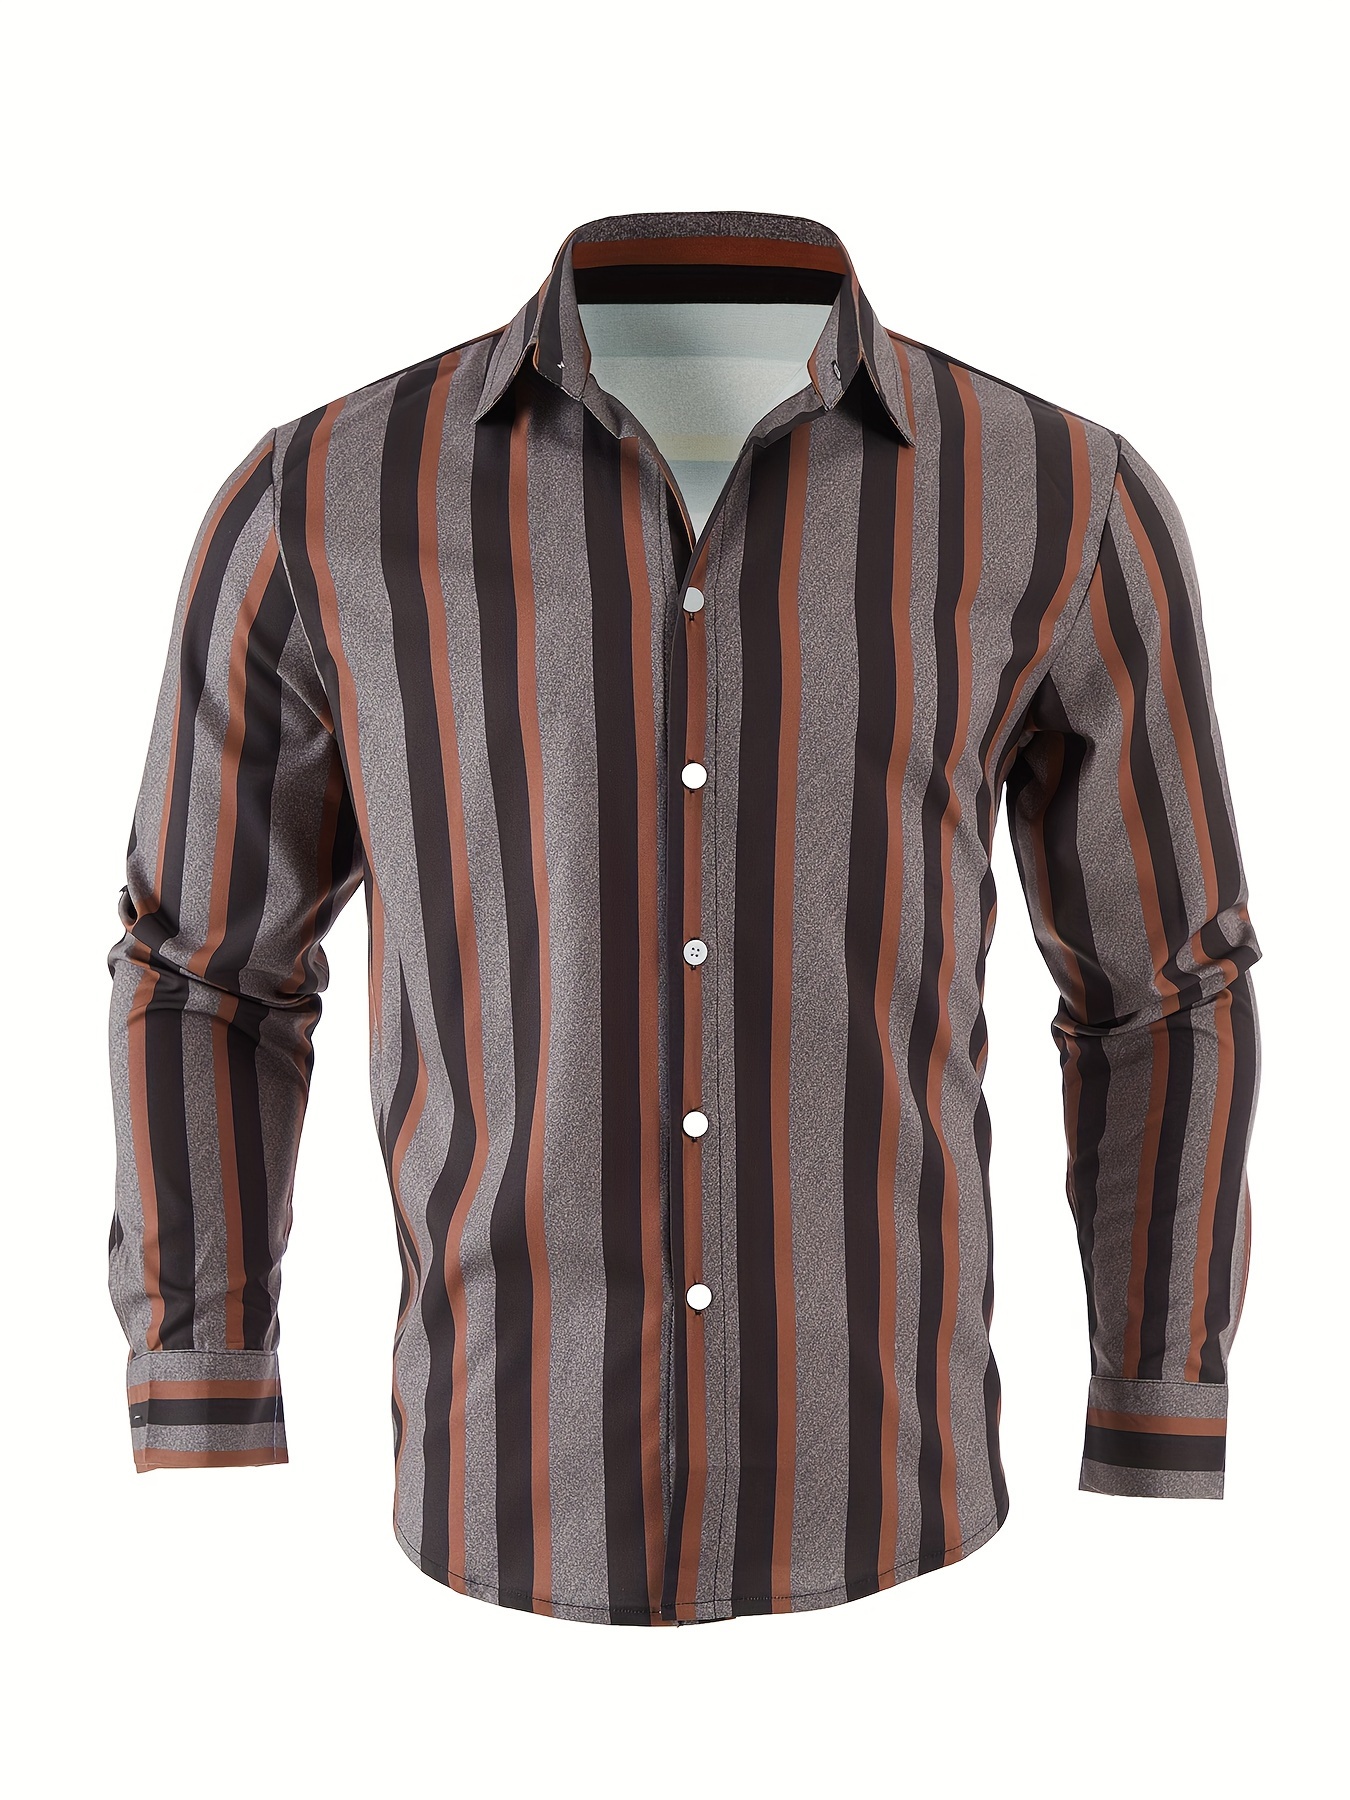 mens classic design striped long sleeve button up shirt for business occasions spring fall mens clothing details 0